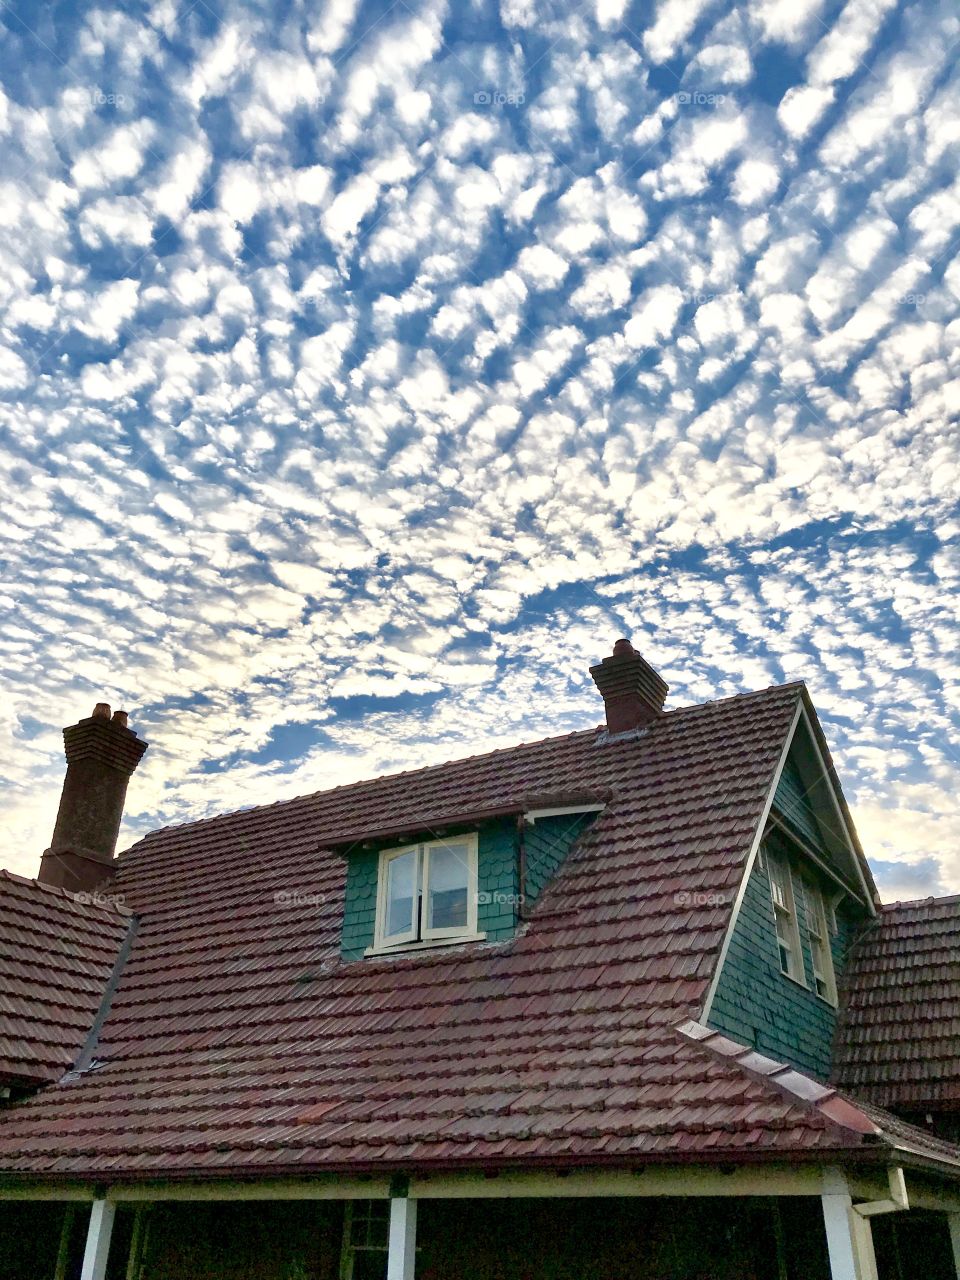 Clouds over red tiled roof and chimneys, Newcastle Australia 